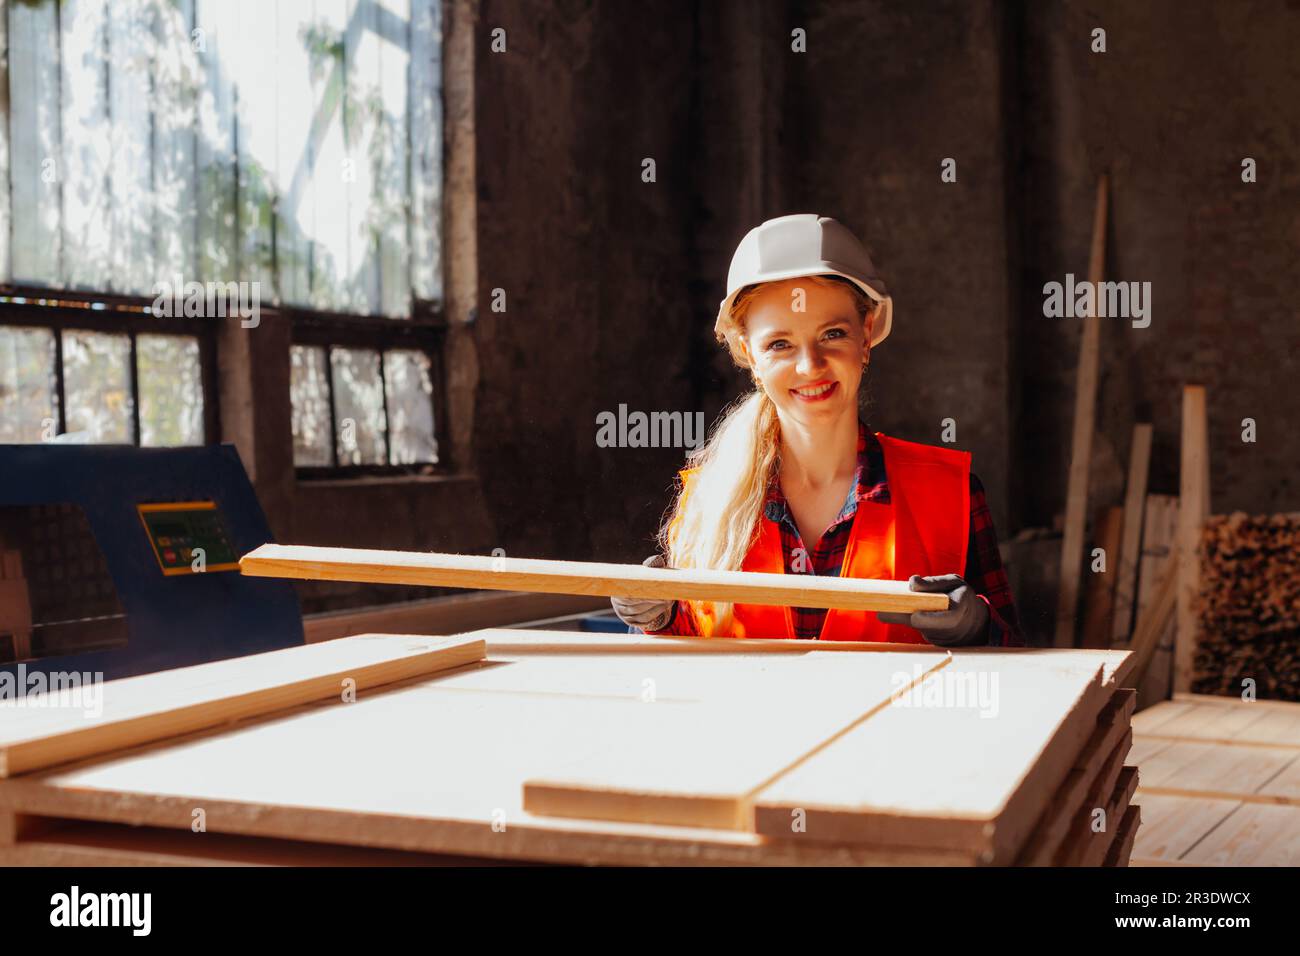 Attractive woman woodwork factory worker holding wooden plank Stock Photo